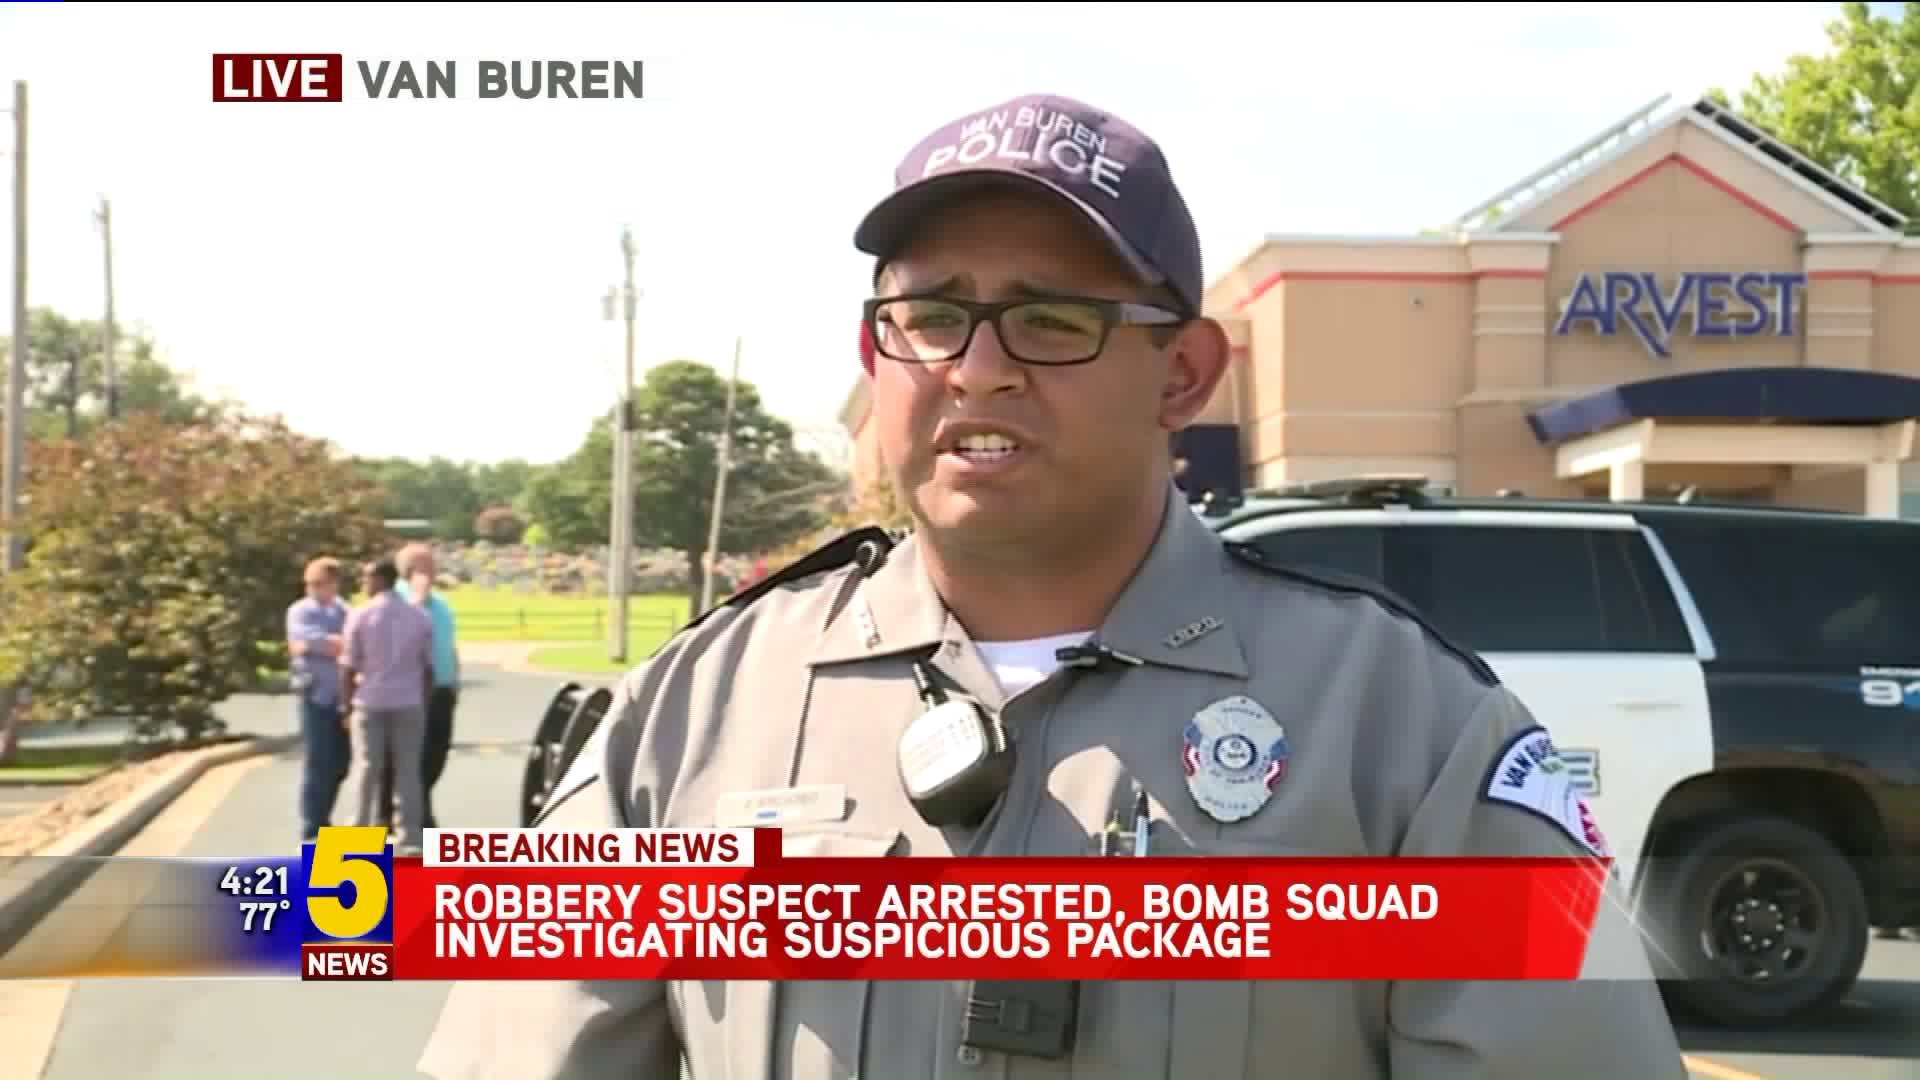 VBPD Gives Update On Bomb Threat At Arvest Bank